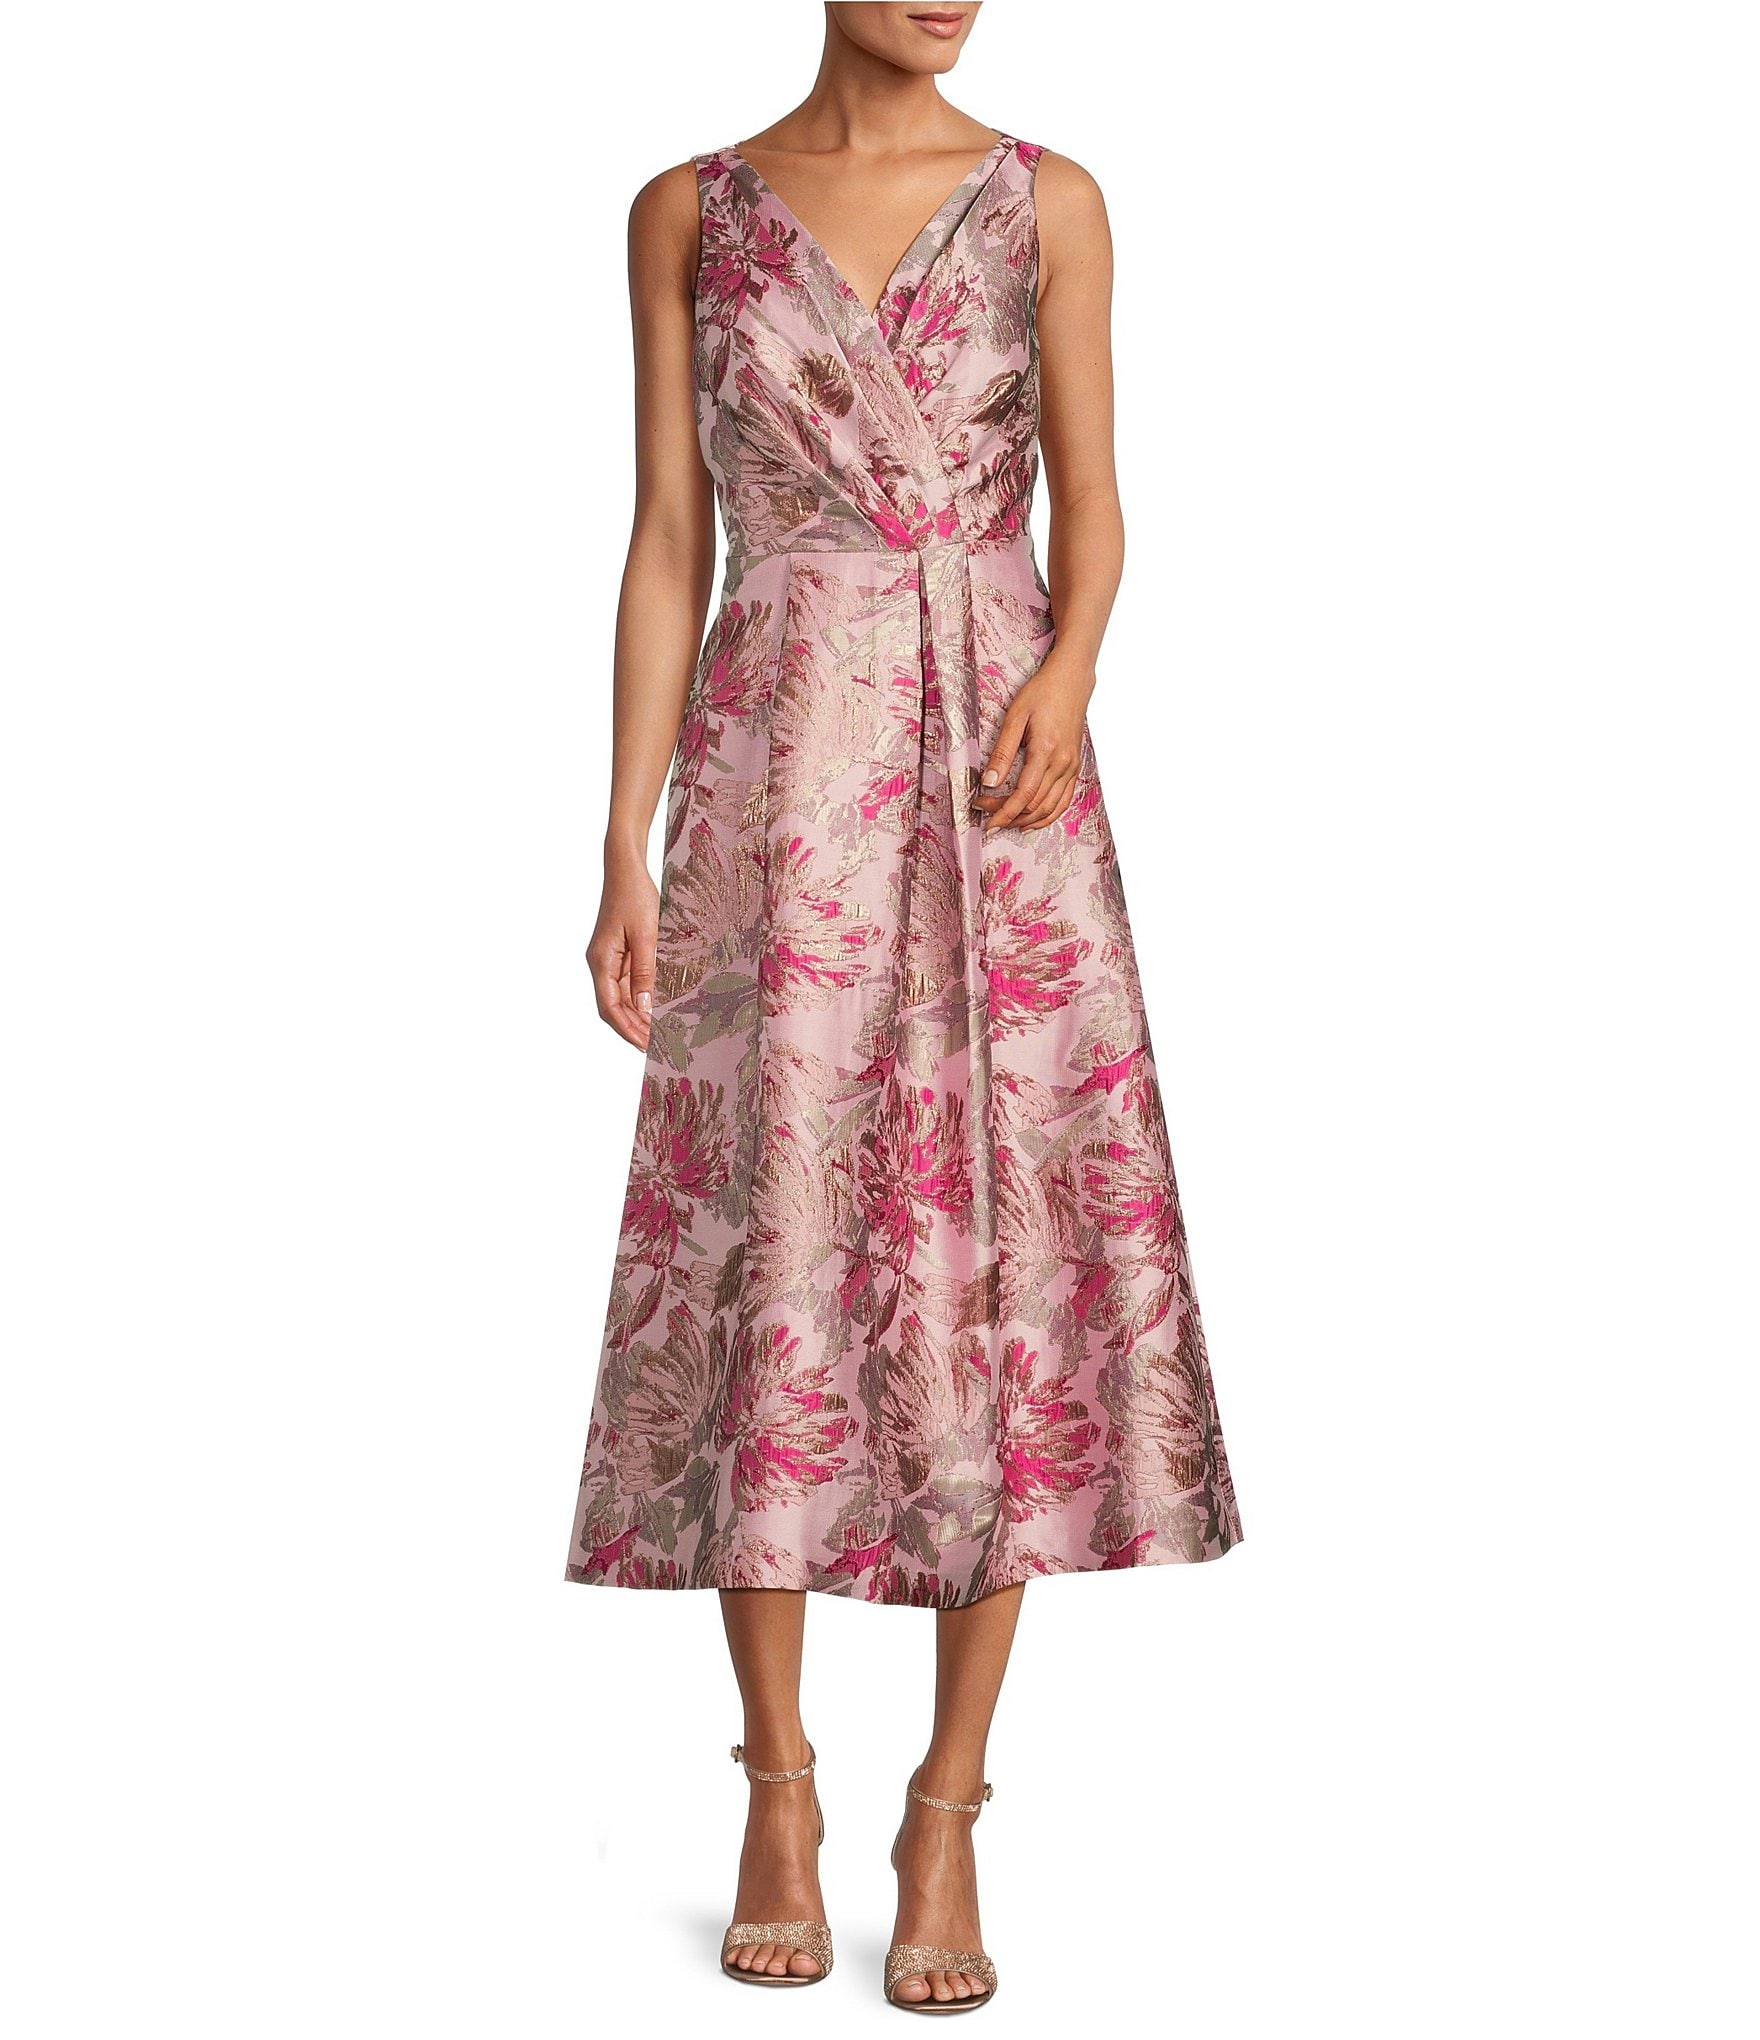 Kay Unger Metallic Floral Print Sleeveless Fit and Flare Tea